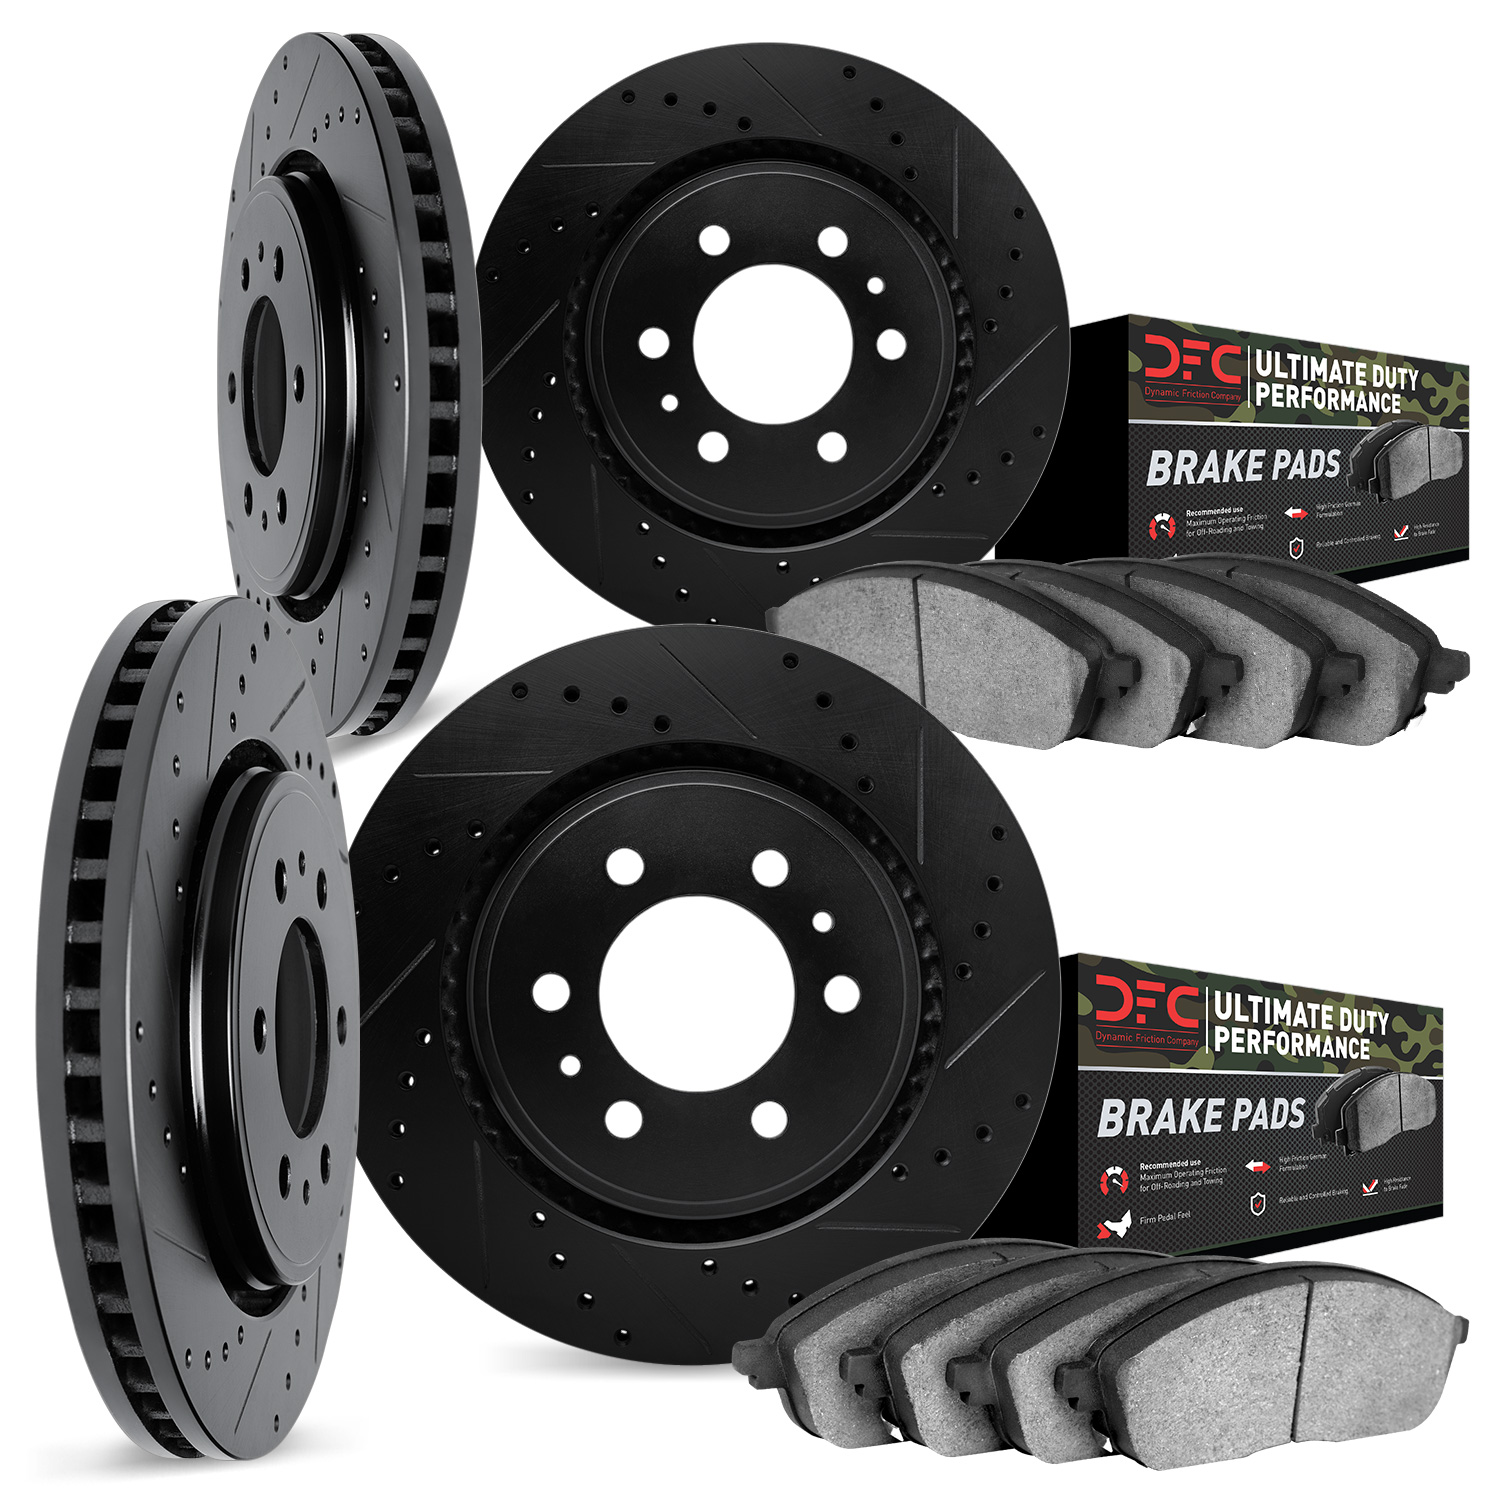 8404-47003 Drilled/Slotted Brake Rotors with Ultimate-Duty Brake Pads Kit [Black], Fits Select GM, Position: Front and Rear